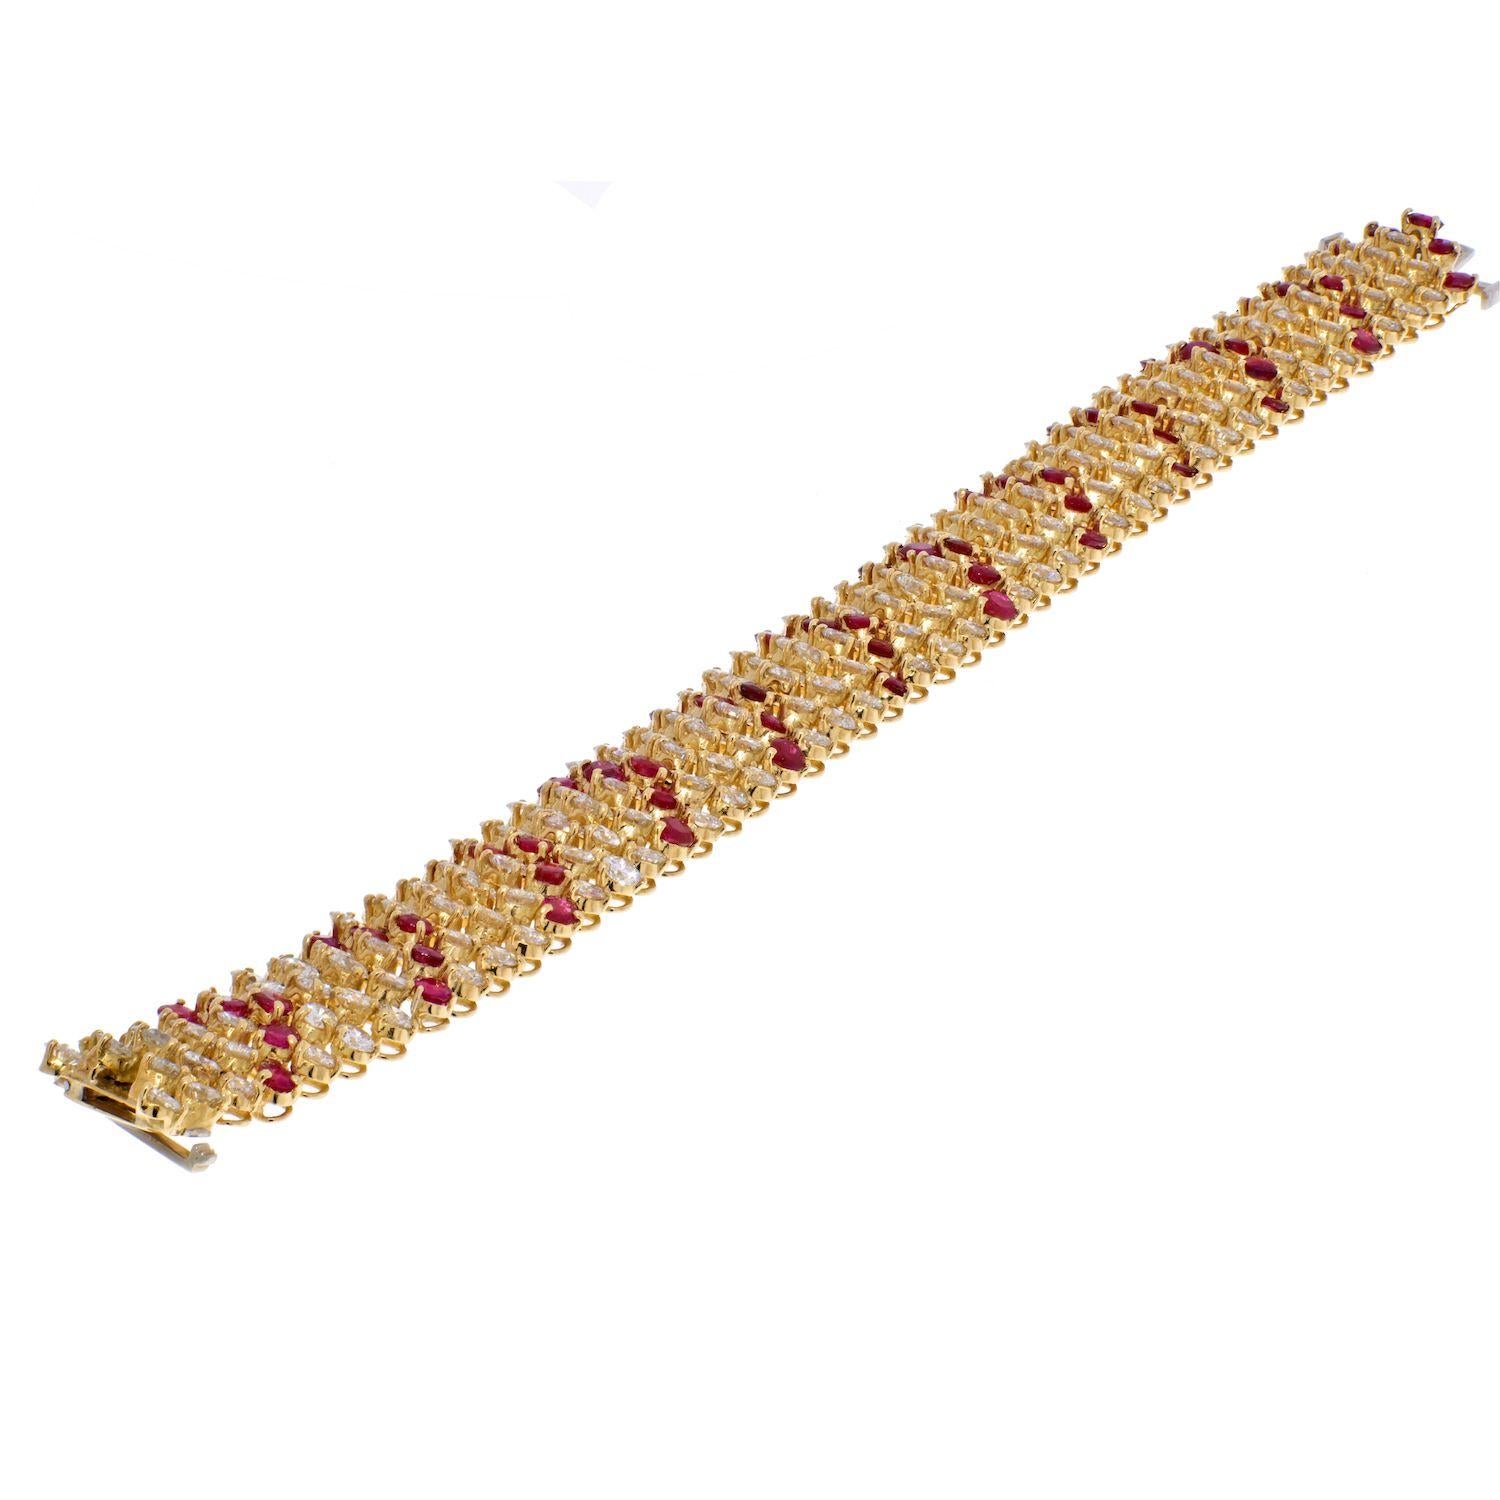 The wide articulated strap of foliate design decorated with diamonds and rubies crafted bt Van Cleef & Arpels. 
Designed as chevrons of 180 round diamonds ap. 23.40 cts., spaced by chevrons of 60 round rubies ap. 9.75 cts., signed VCA NY.
Length 7